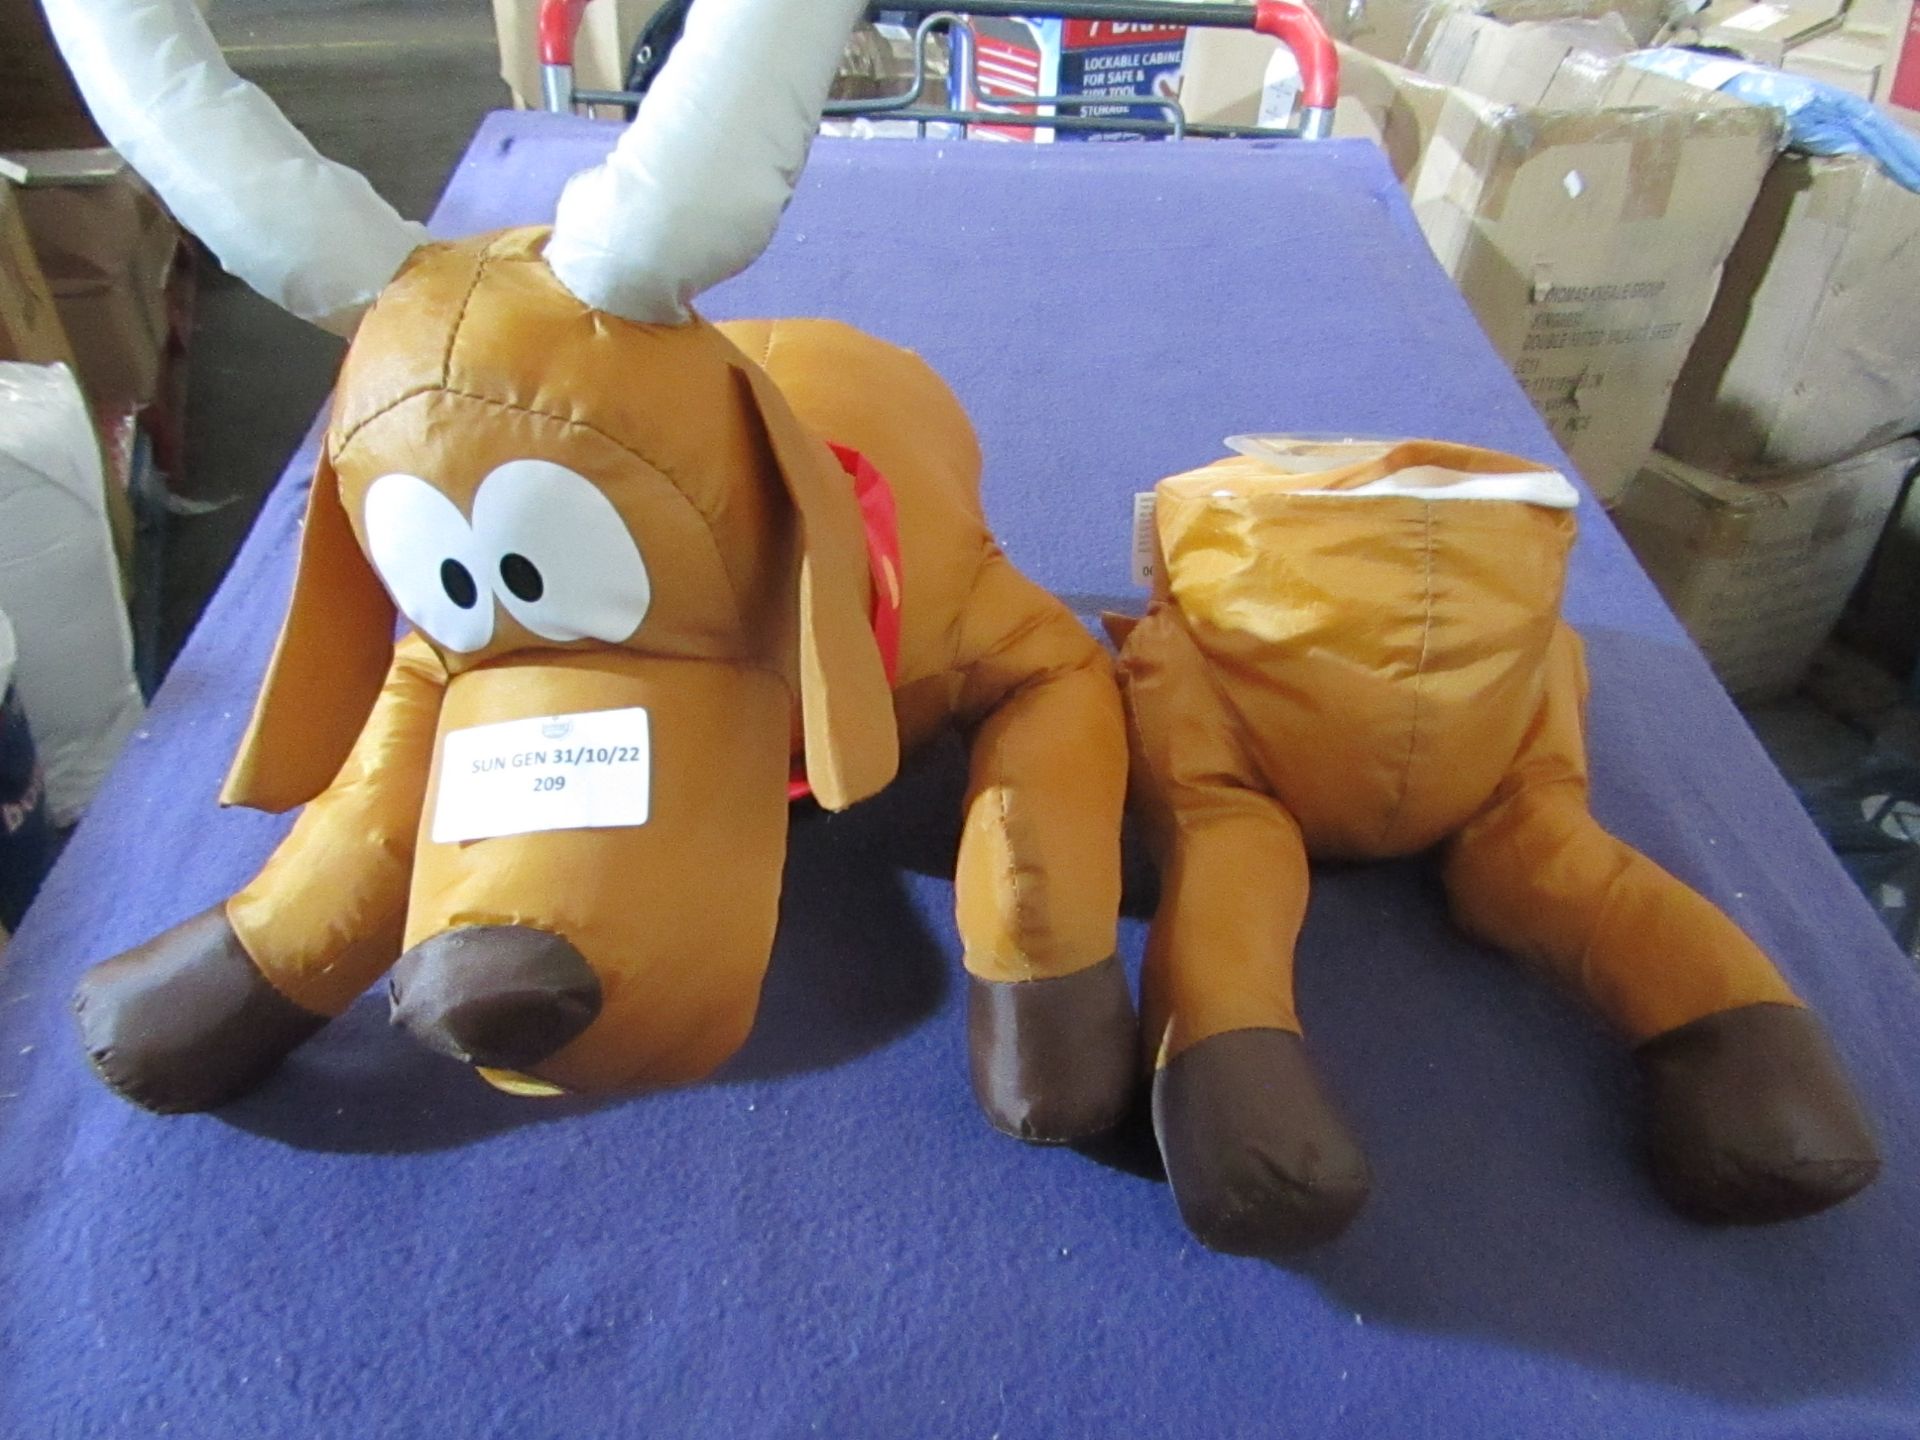 Celebright - Crashing Reindeer ( For Mounting On Glass ) - Good Condition, No Packaging.